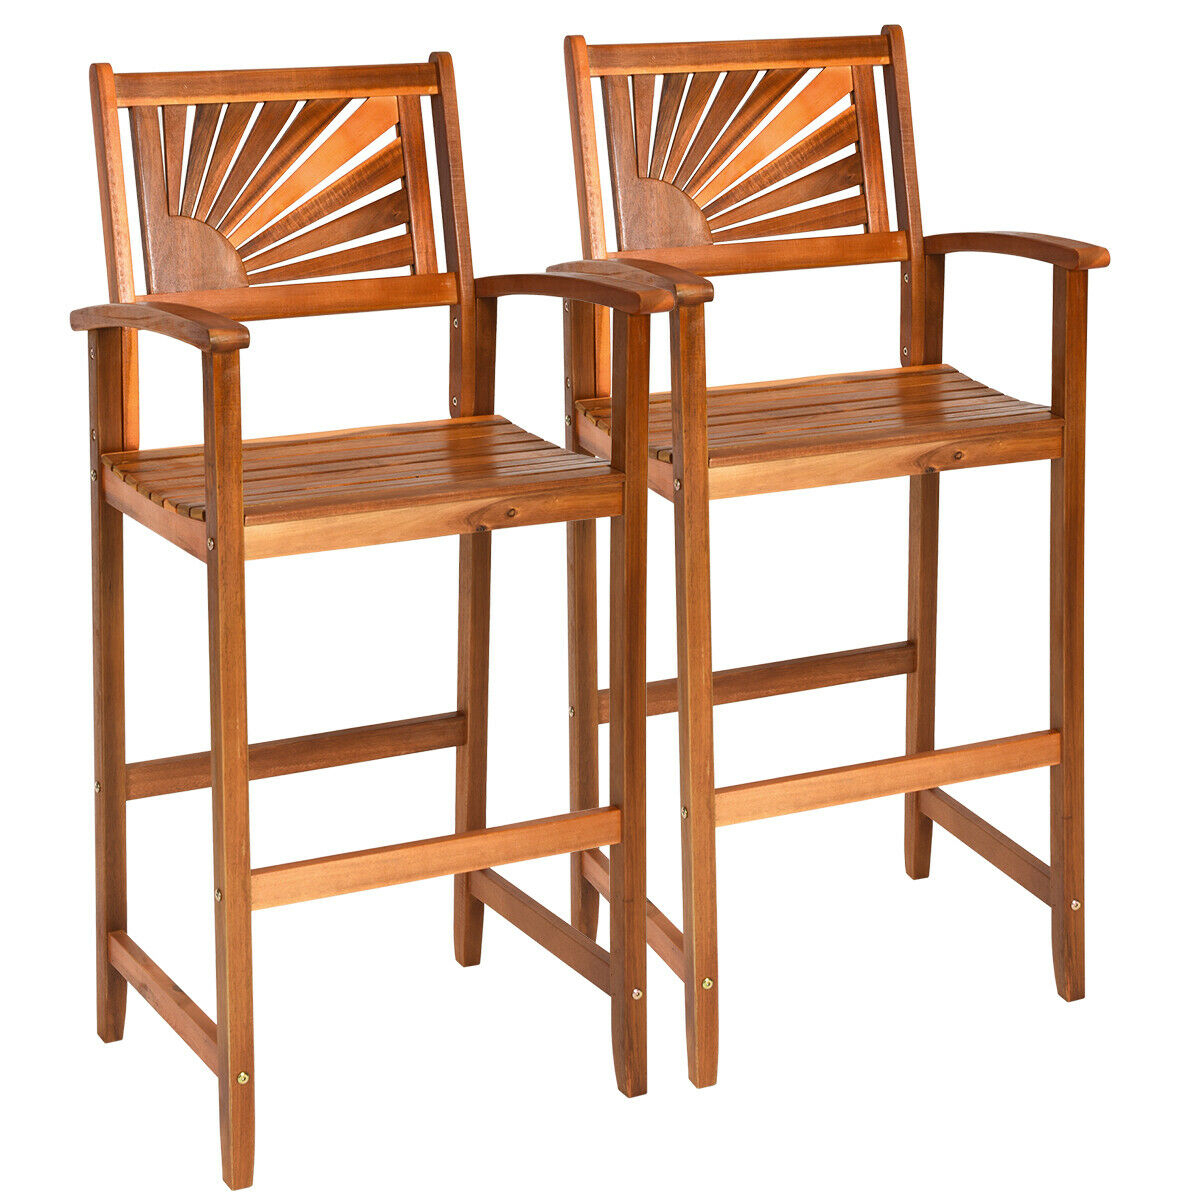 Set Of 2 Acacia Wood Barstools 29'' Bar Chair W/ Sector Backrest & Slatted Seat